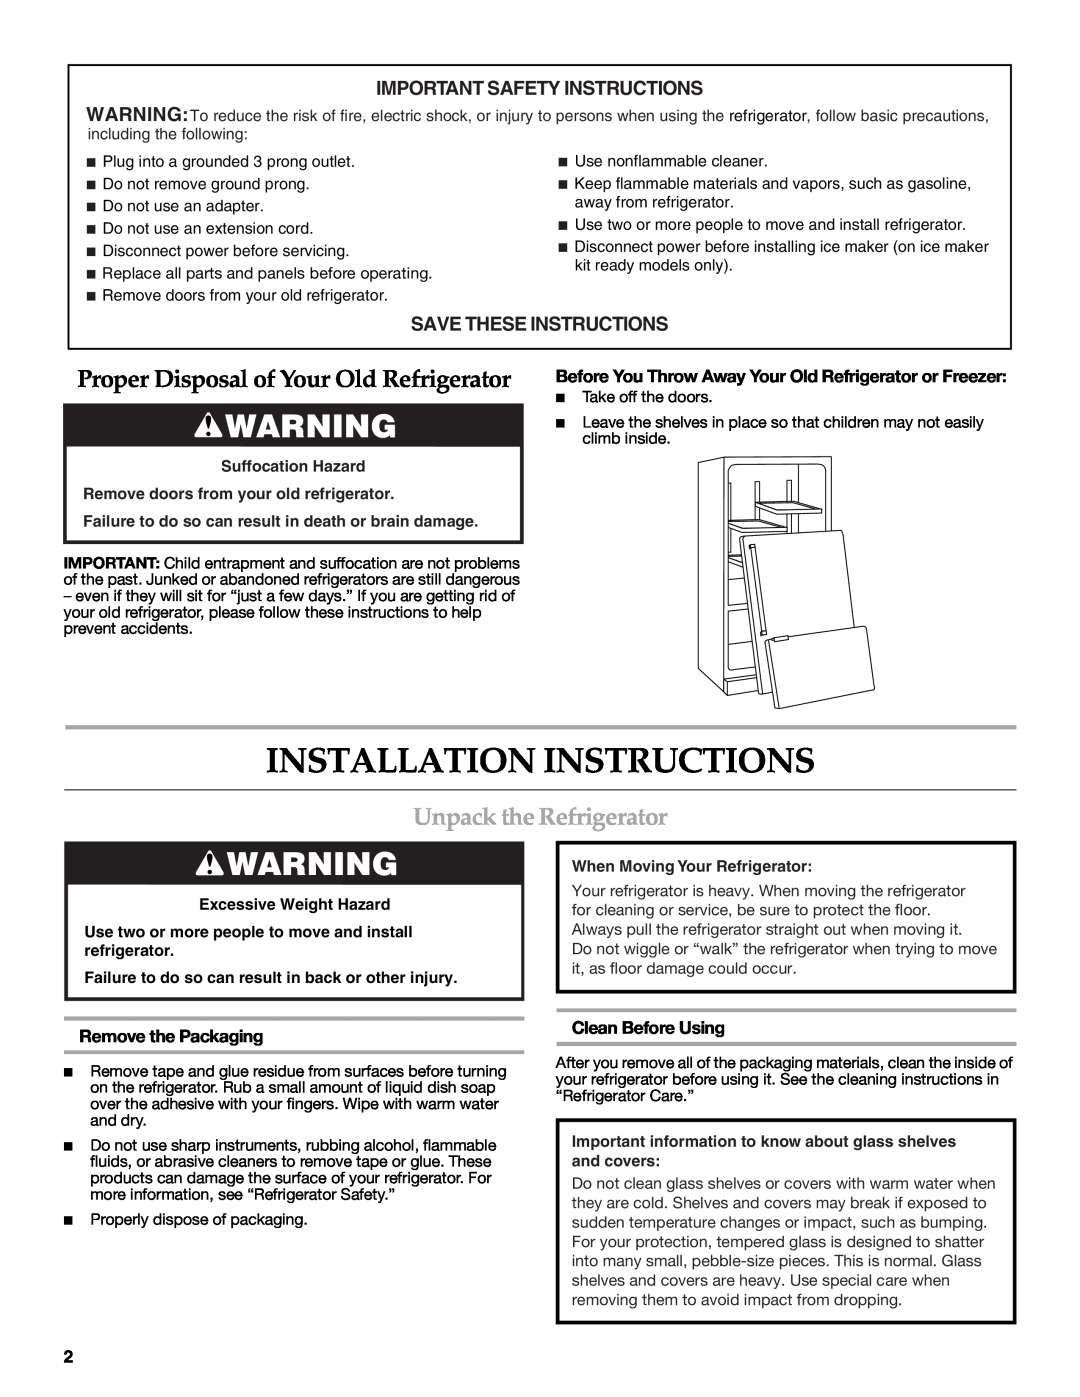 KitchenAid W10137649A Installation Instructions, Proper Disposal of Your Old Refrigerator, Unpack the Refrigerator 